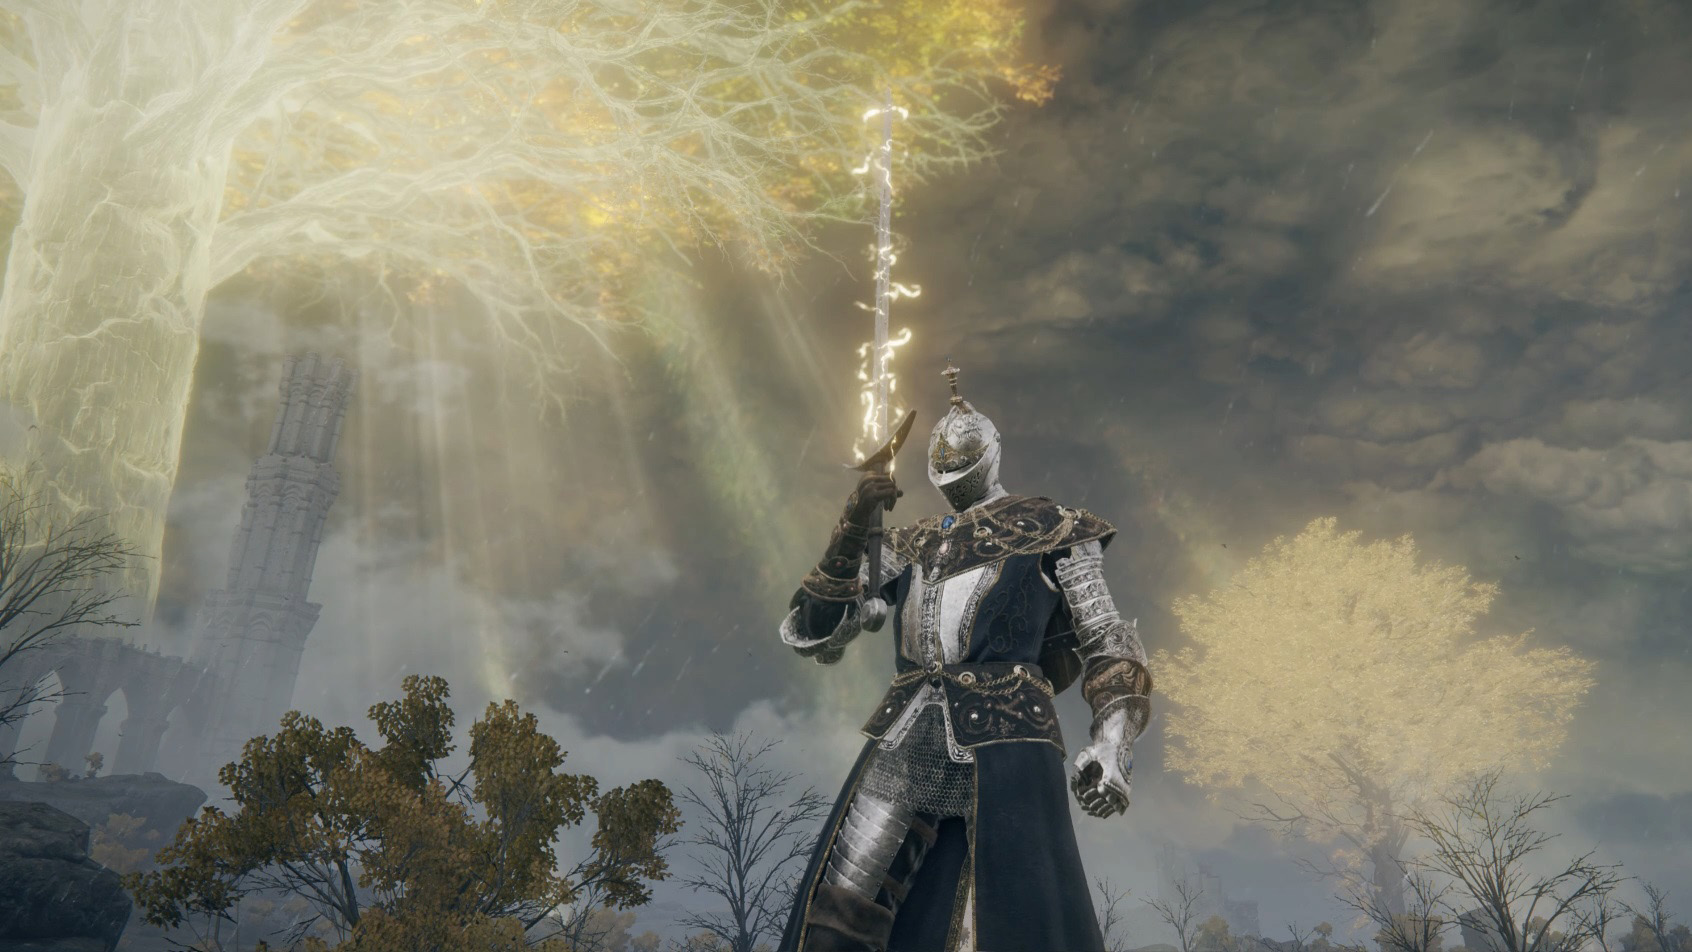  Elden Ring's open world 'took a lot more effort' than previous Souls games 